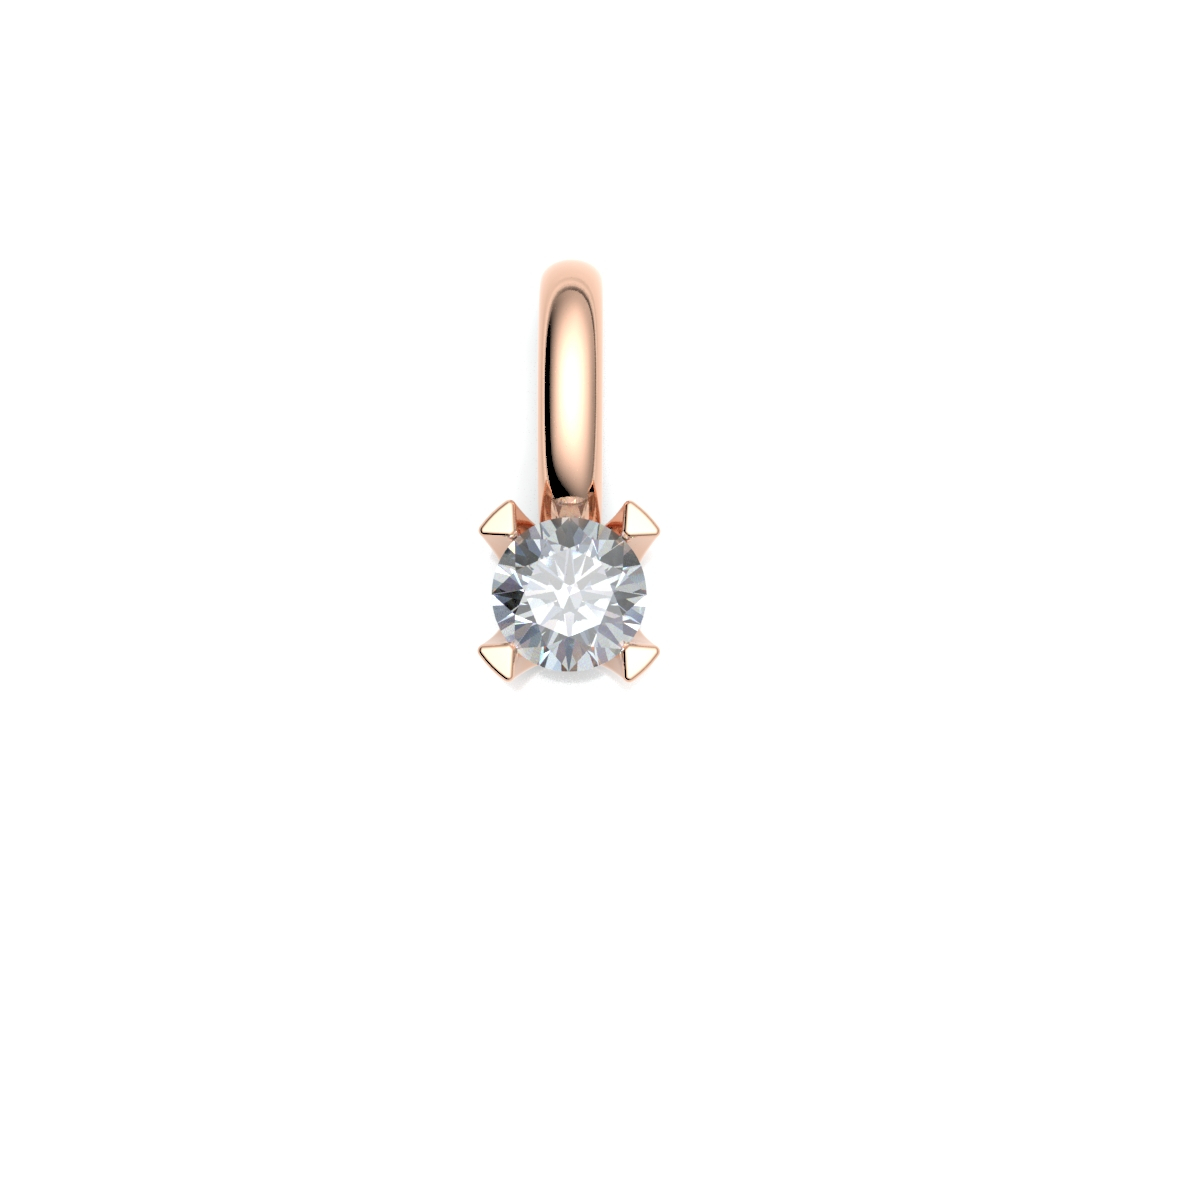 212798-4034-001 | Anhänger Ingelheim 212798 375 Rotgold Brillant 0,150 ct H-SI ∅ 3.4mm100% Made in Germany  